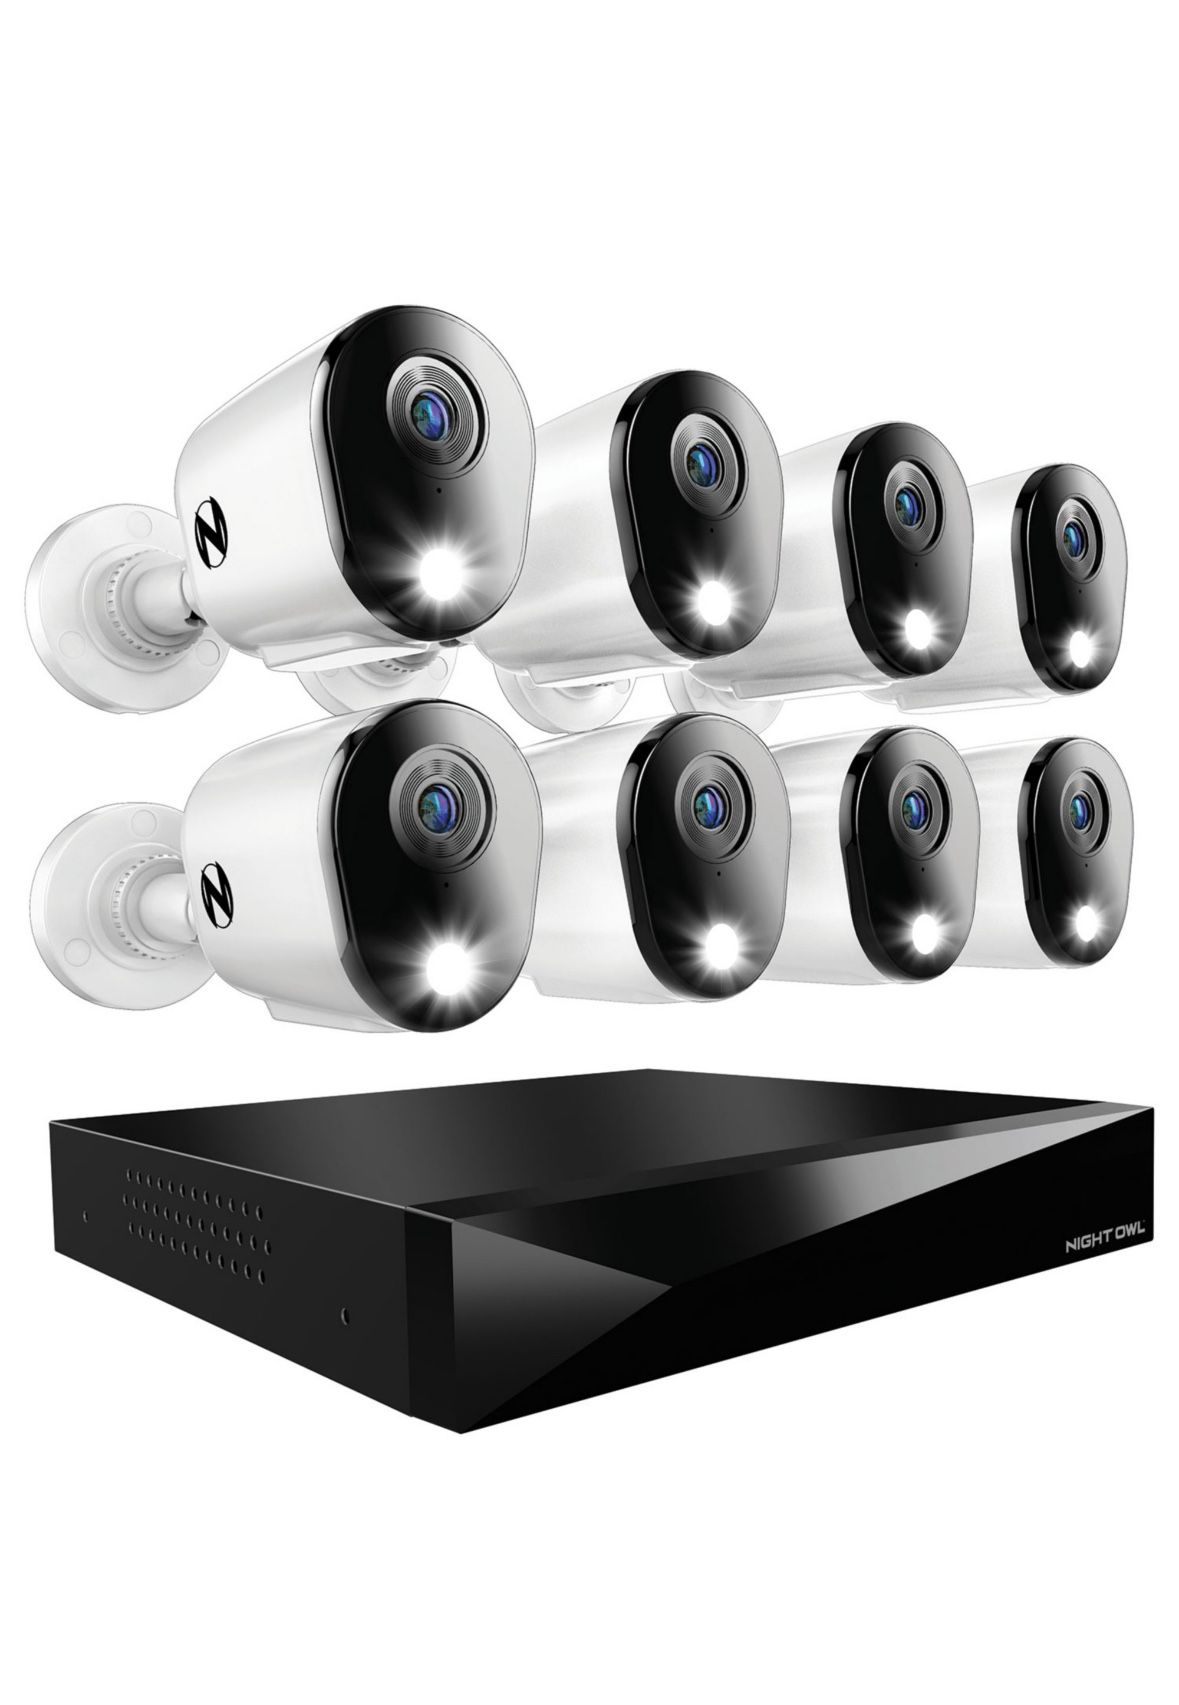 Night Owl 12 Channel 8 Wired 4 WiFi 2K DVR Security System 2TB Hard Drive Brand New In Box 